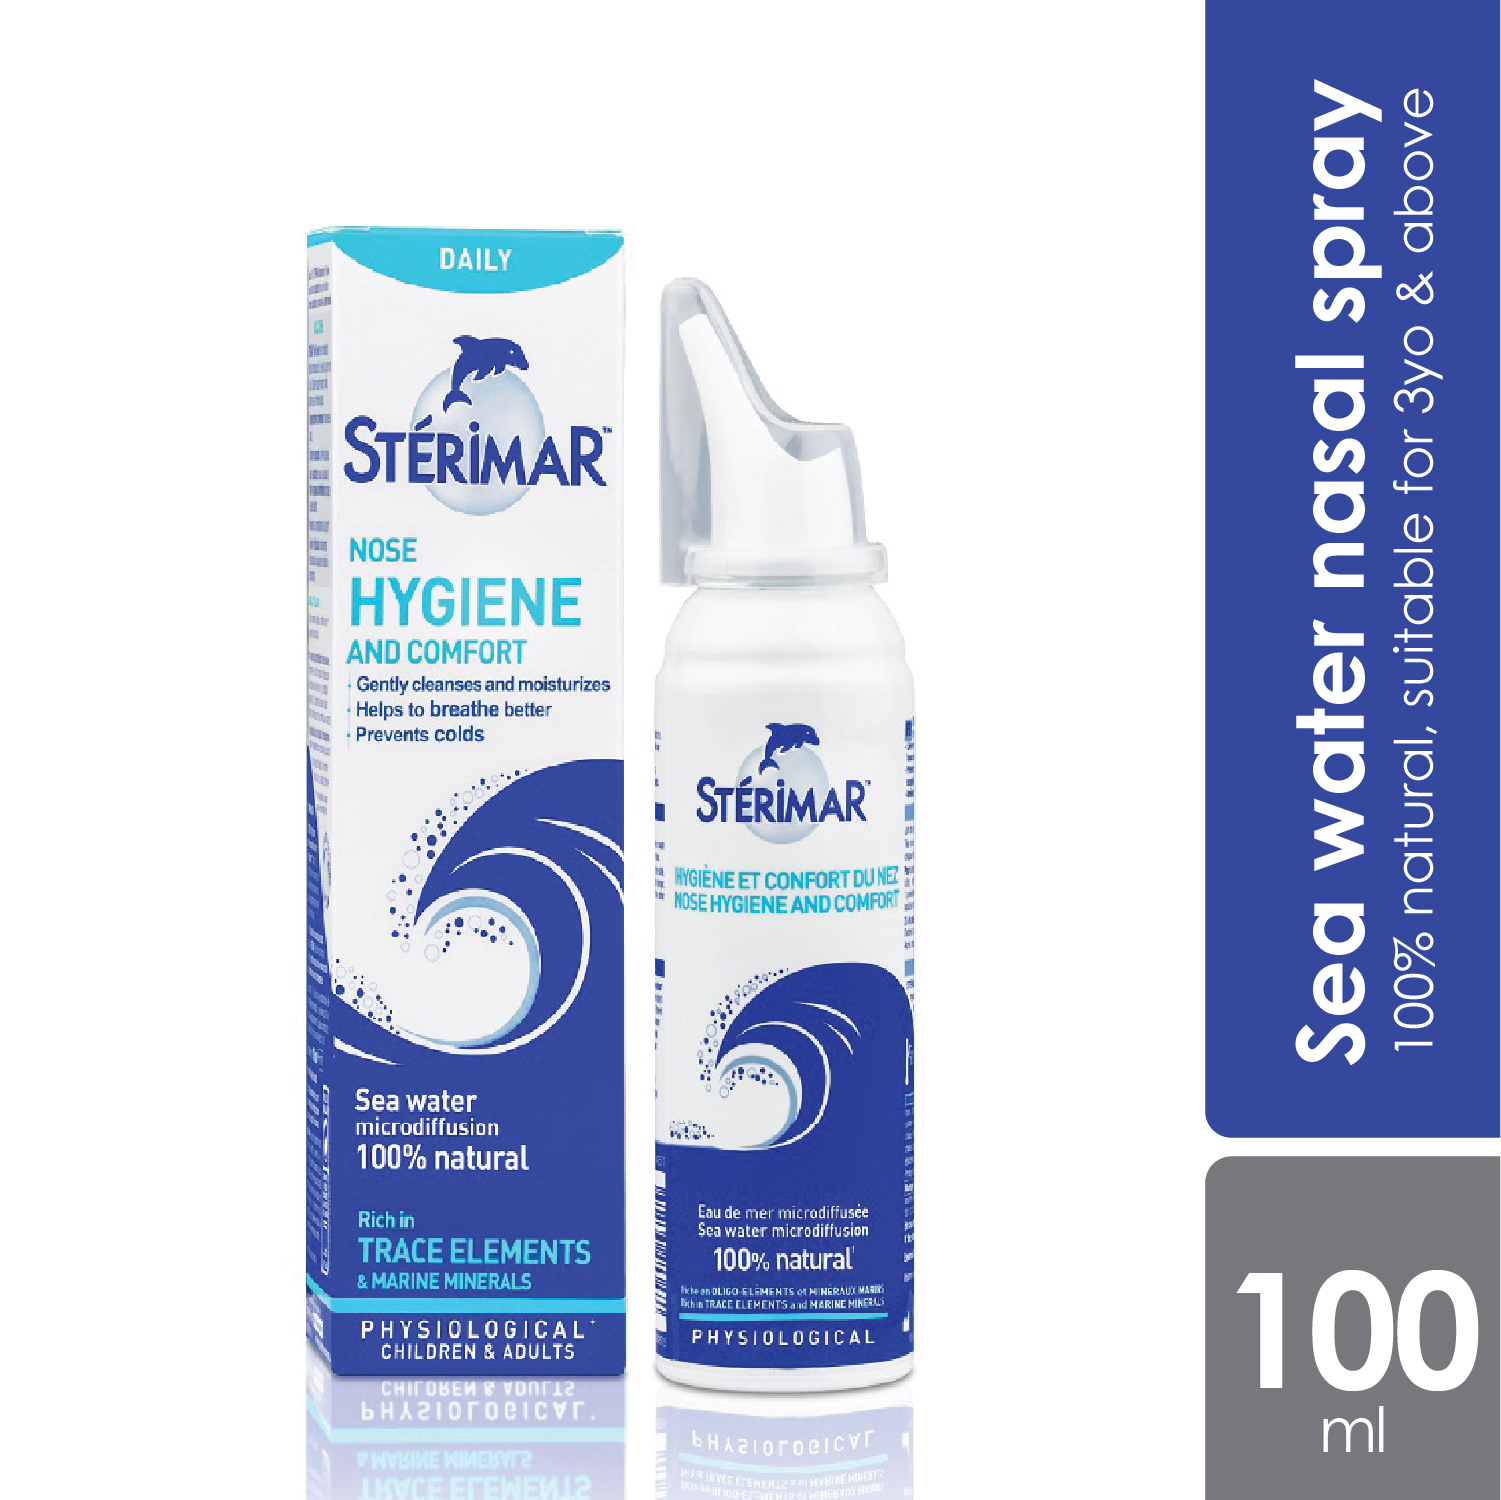 Sterimar Nose Hygiene And Comfort 100ml - Alpro Pharmacy